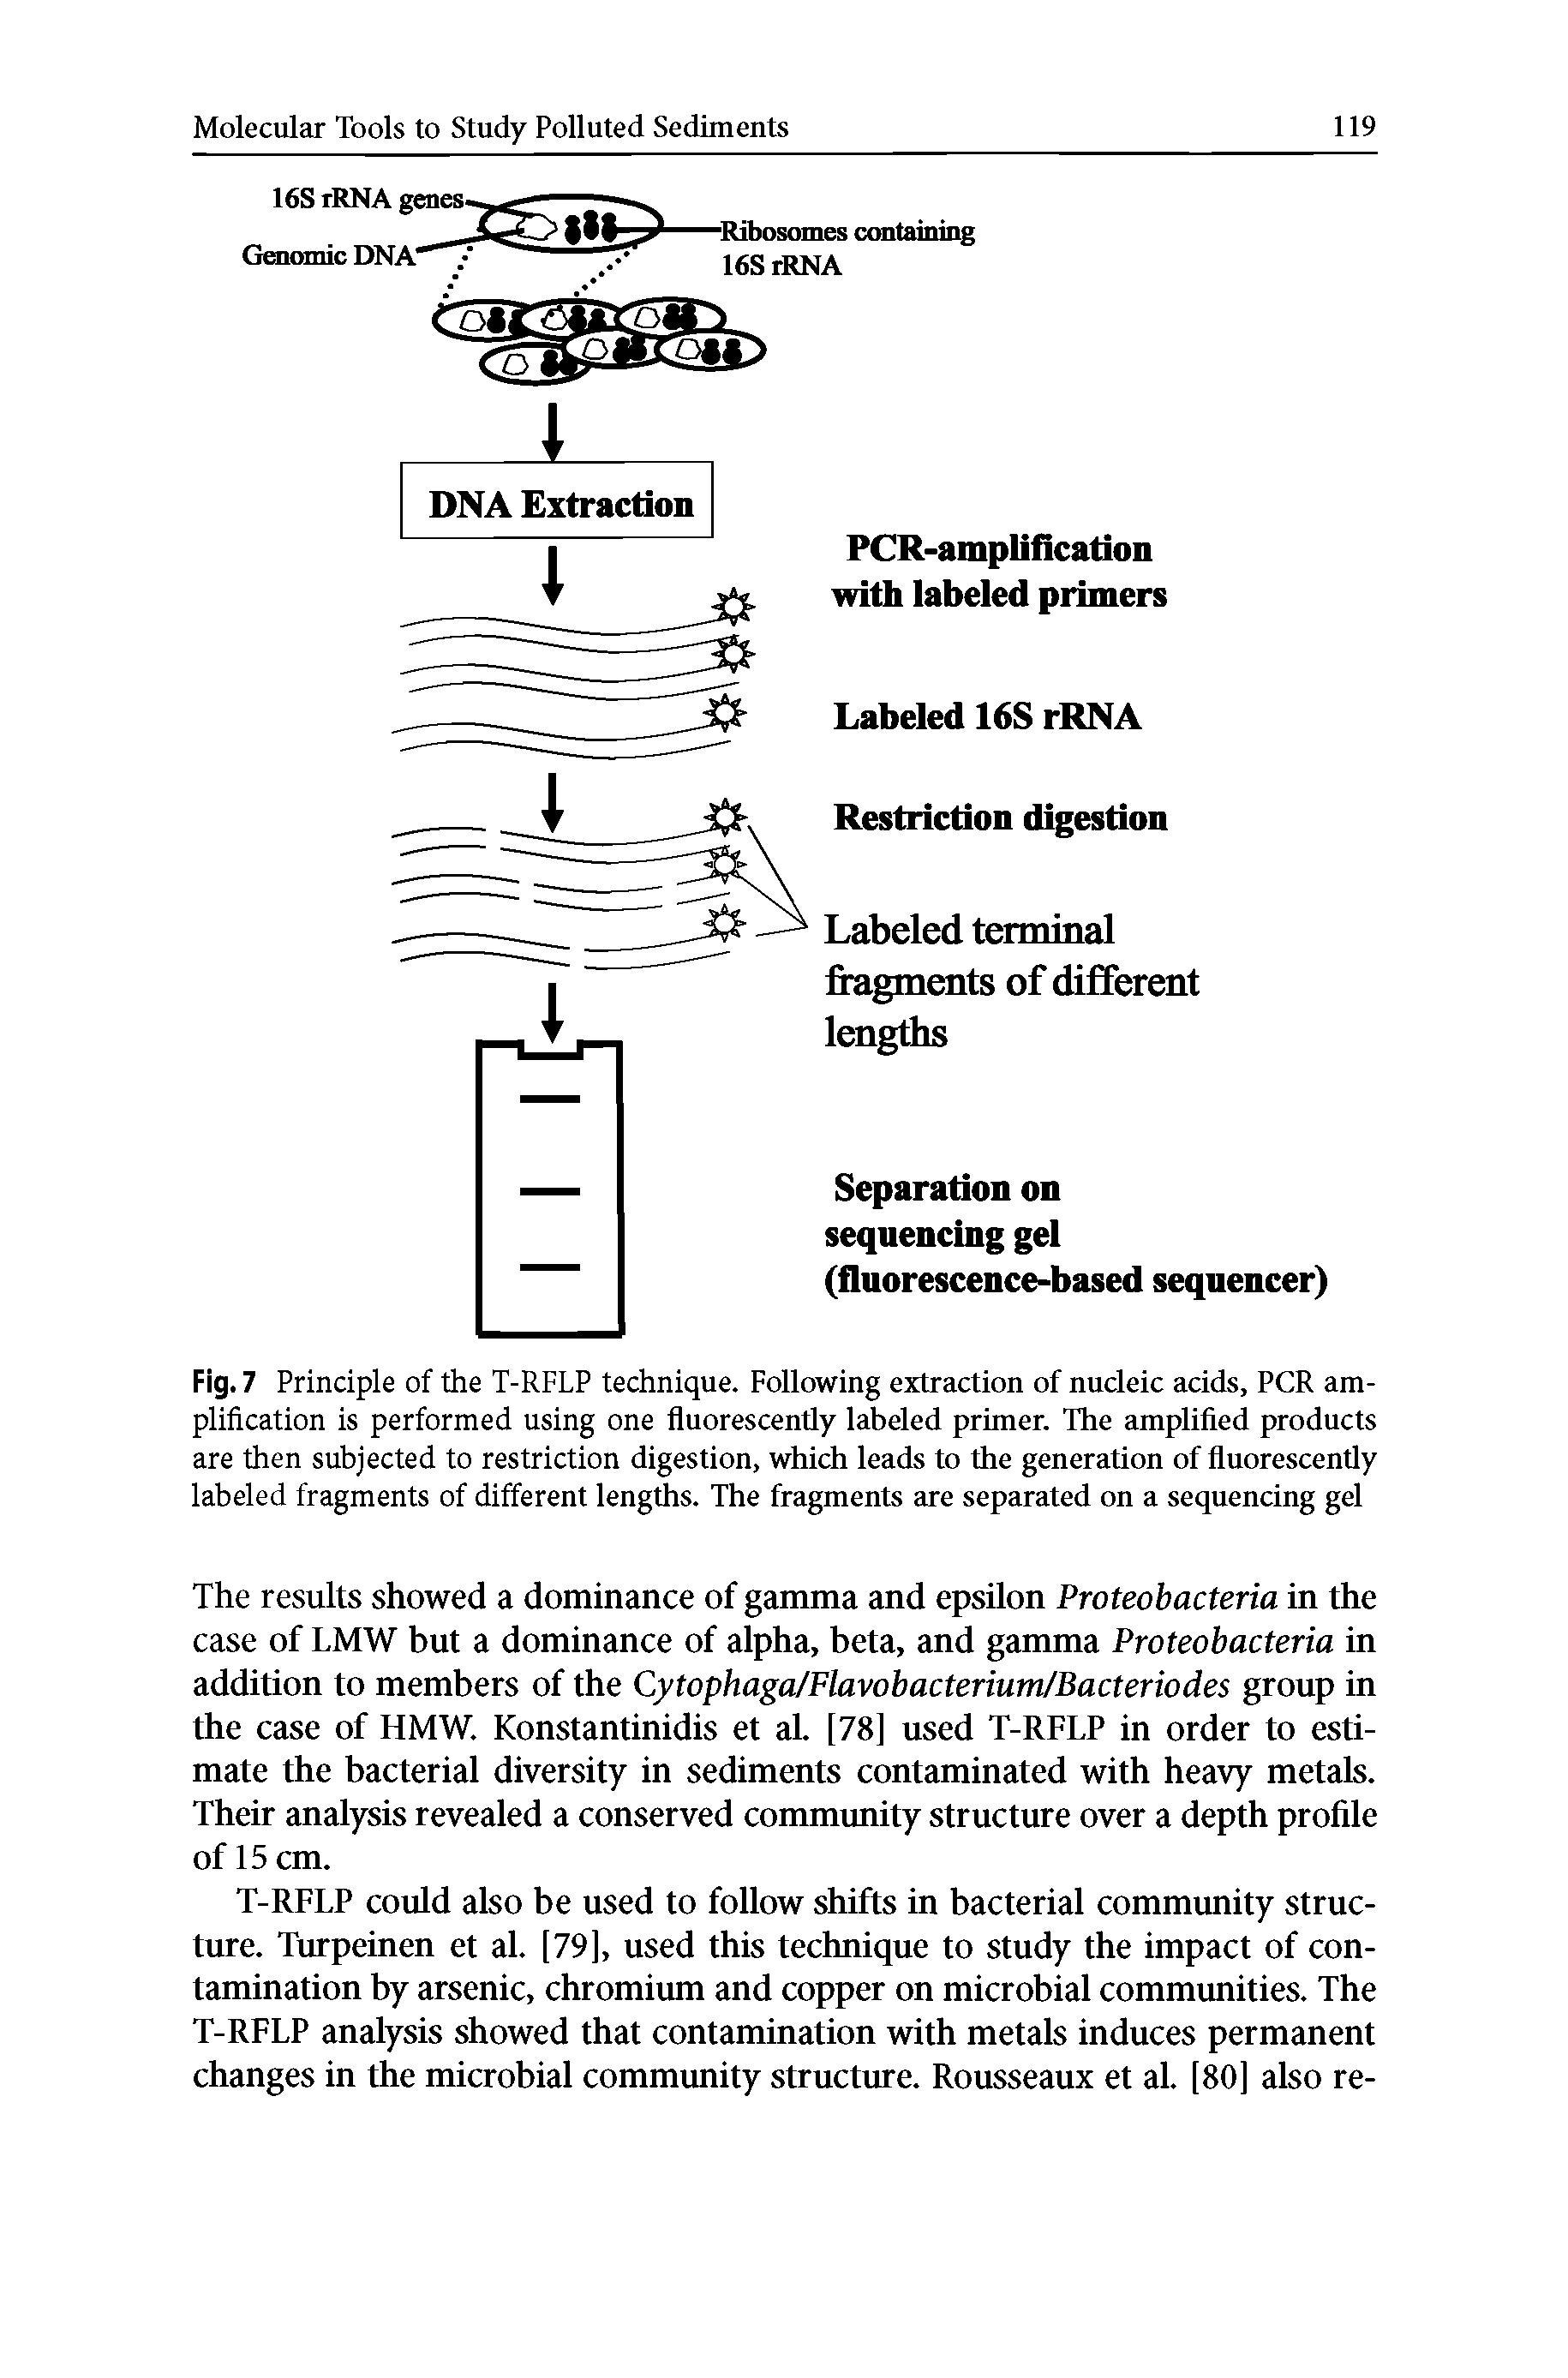 Fig. 7 Principle of the T-RFLP technique. Following extraction of nucleic acids, PGR amplification is performed using one fluorescently labeled primer. The amplified products are then subjected to restriction digestion, which leads to the generation of fluorescently labeled fragments of different lengths. The fragments are separated on a sequencing gel...